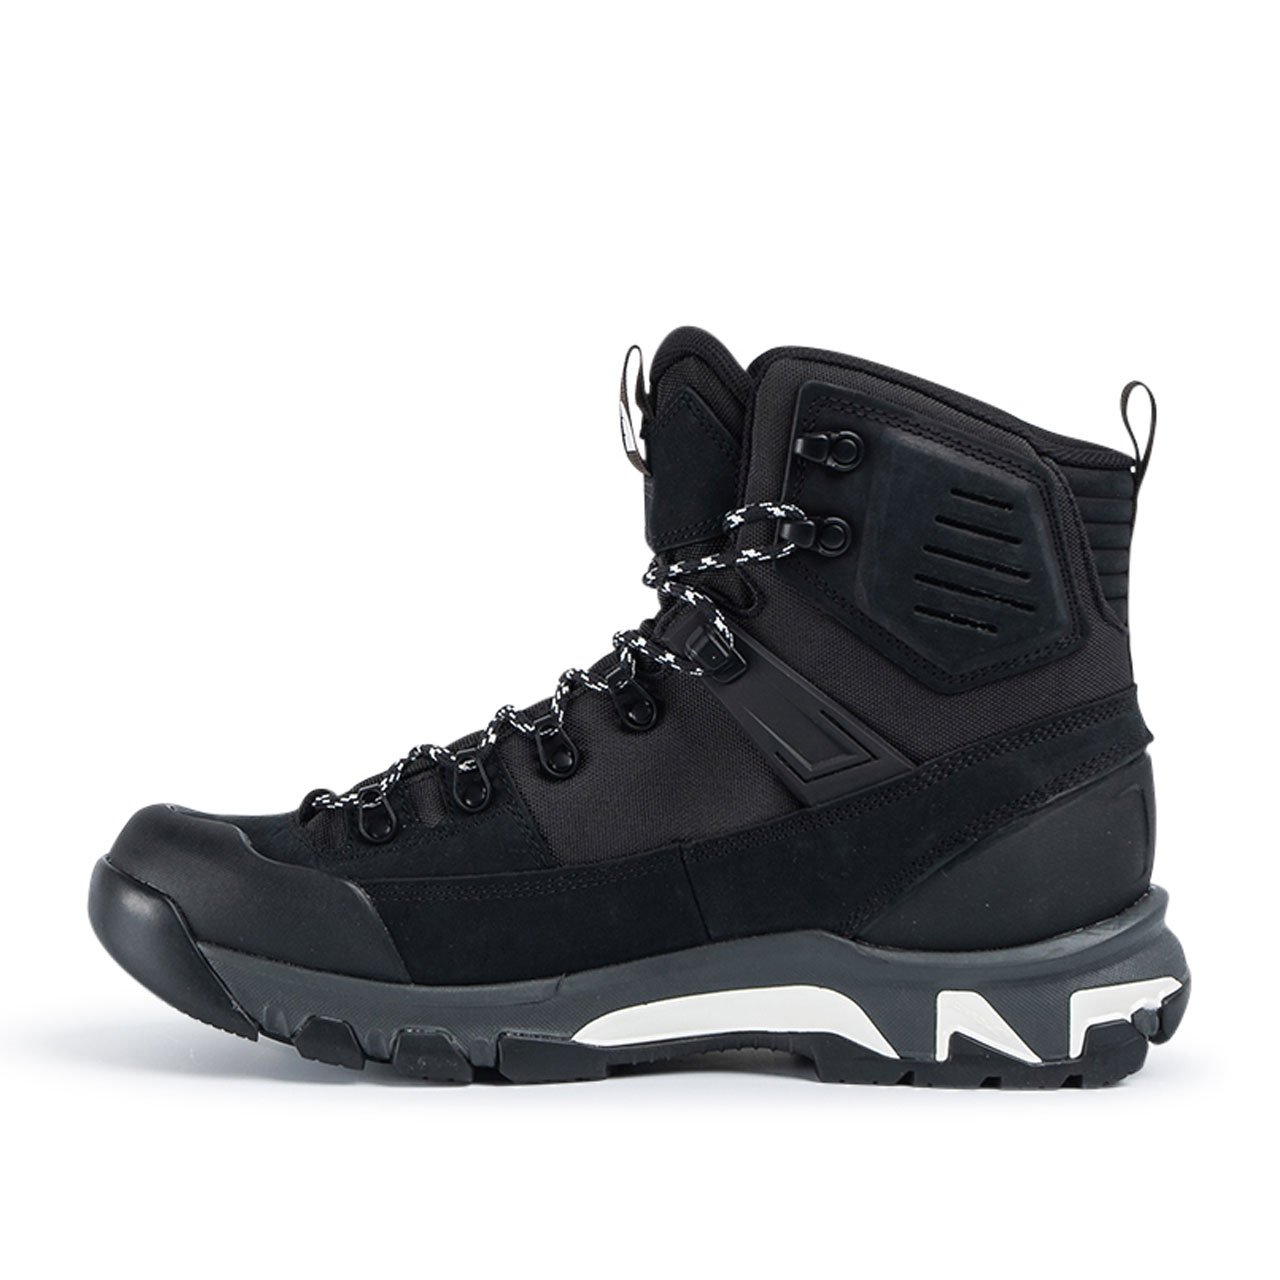 the north face black series steep tech crestvale boots (black) - nf0a4t2nky4 - a.plus - Image - 3